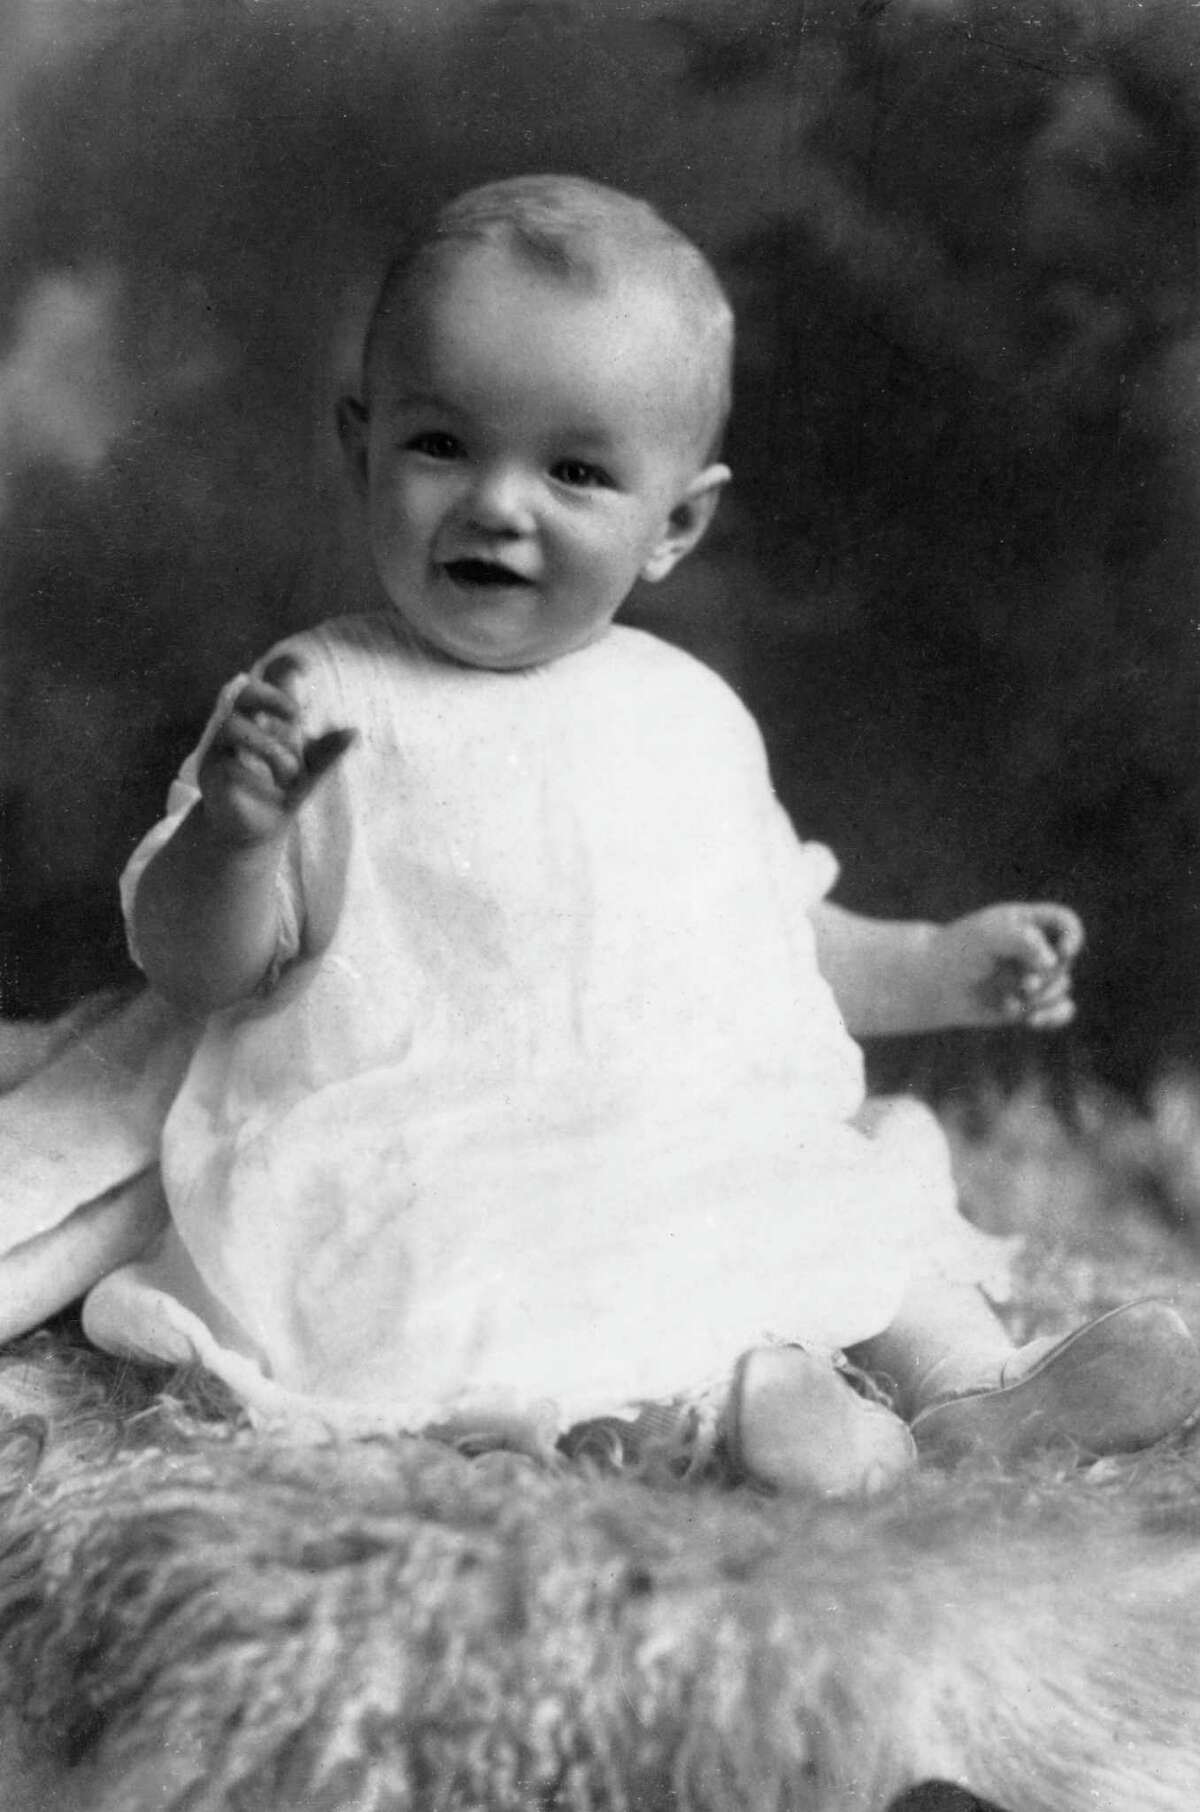 circa 1927: Studio portrait of American actor Marilyn Monroe (born Norma Jean Mortenson, 1926 - 1962) at the age of six months, sitting on a woolly rug in a white smock. (Photo by Hulton Archive/Getty Images)